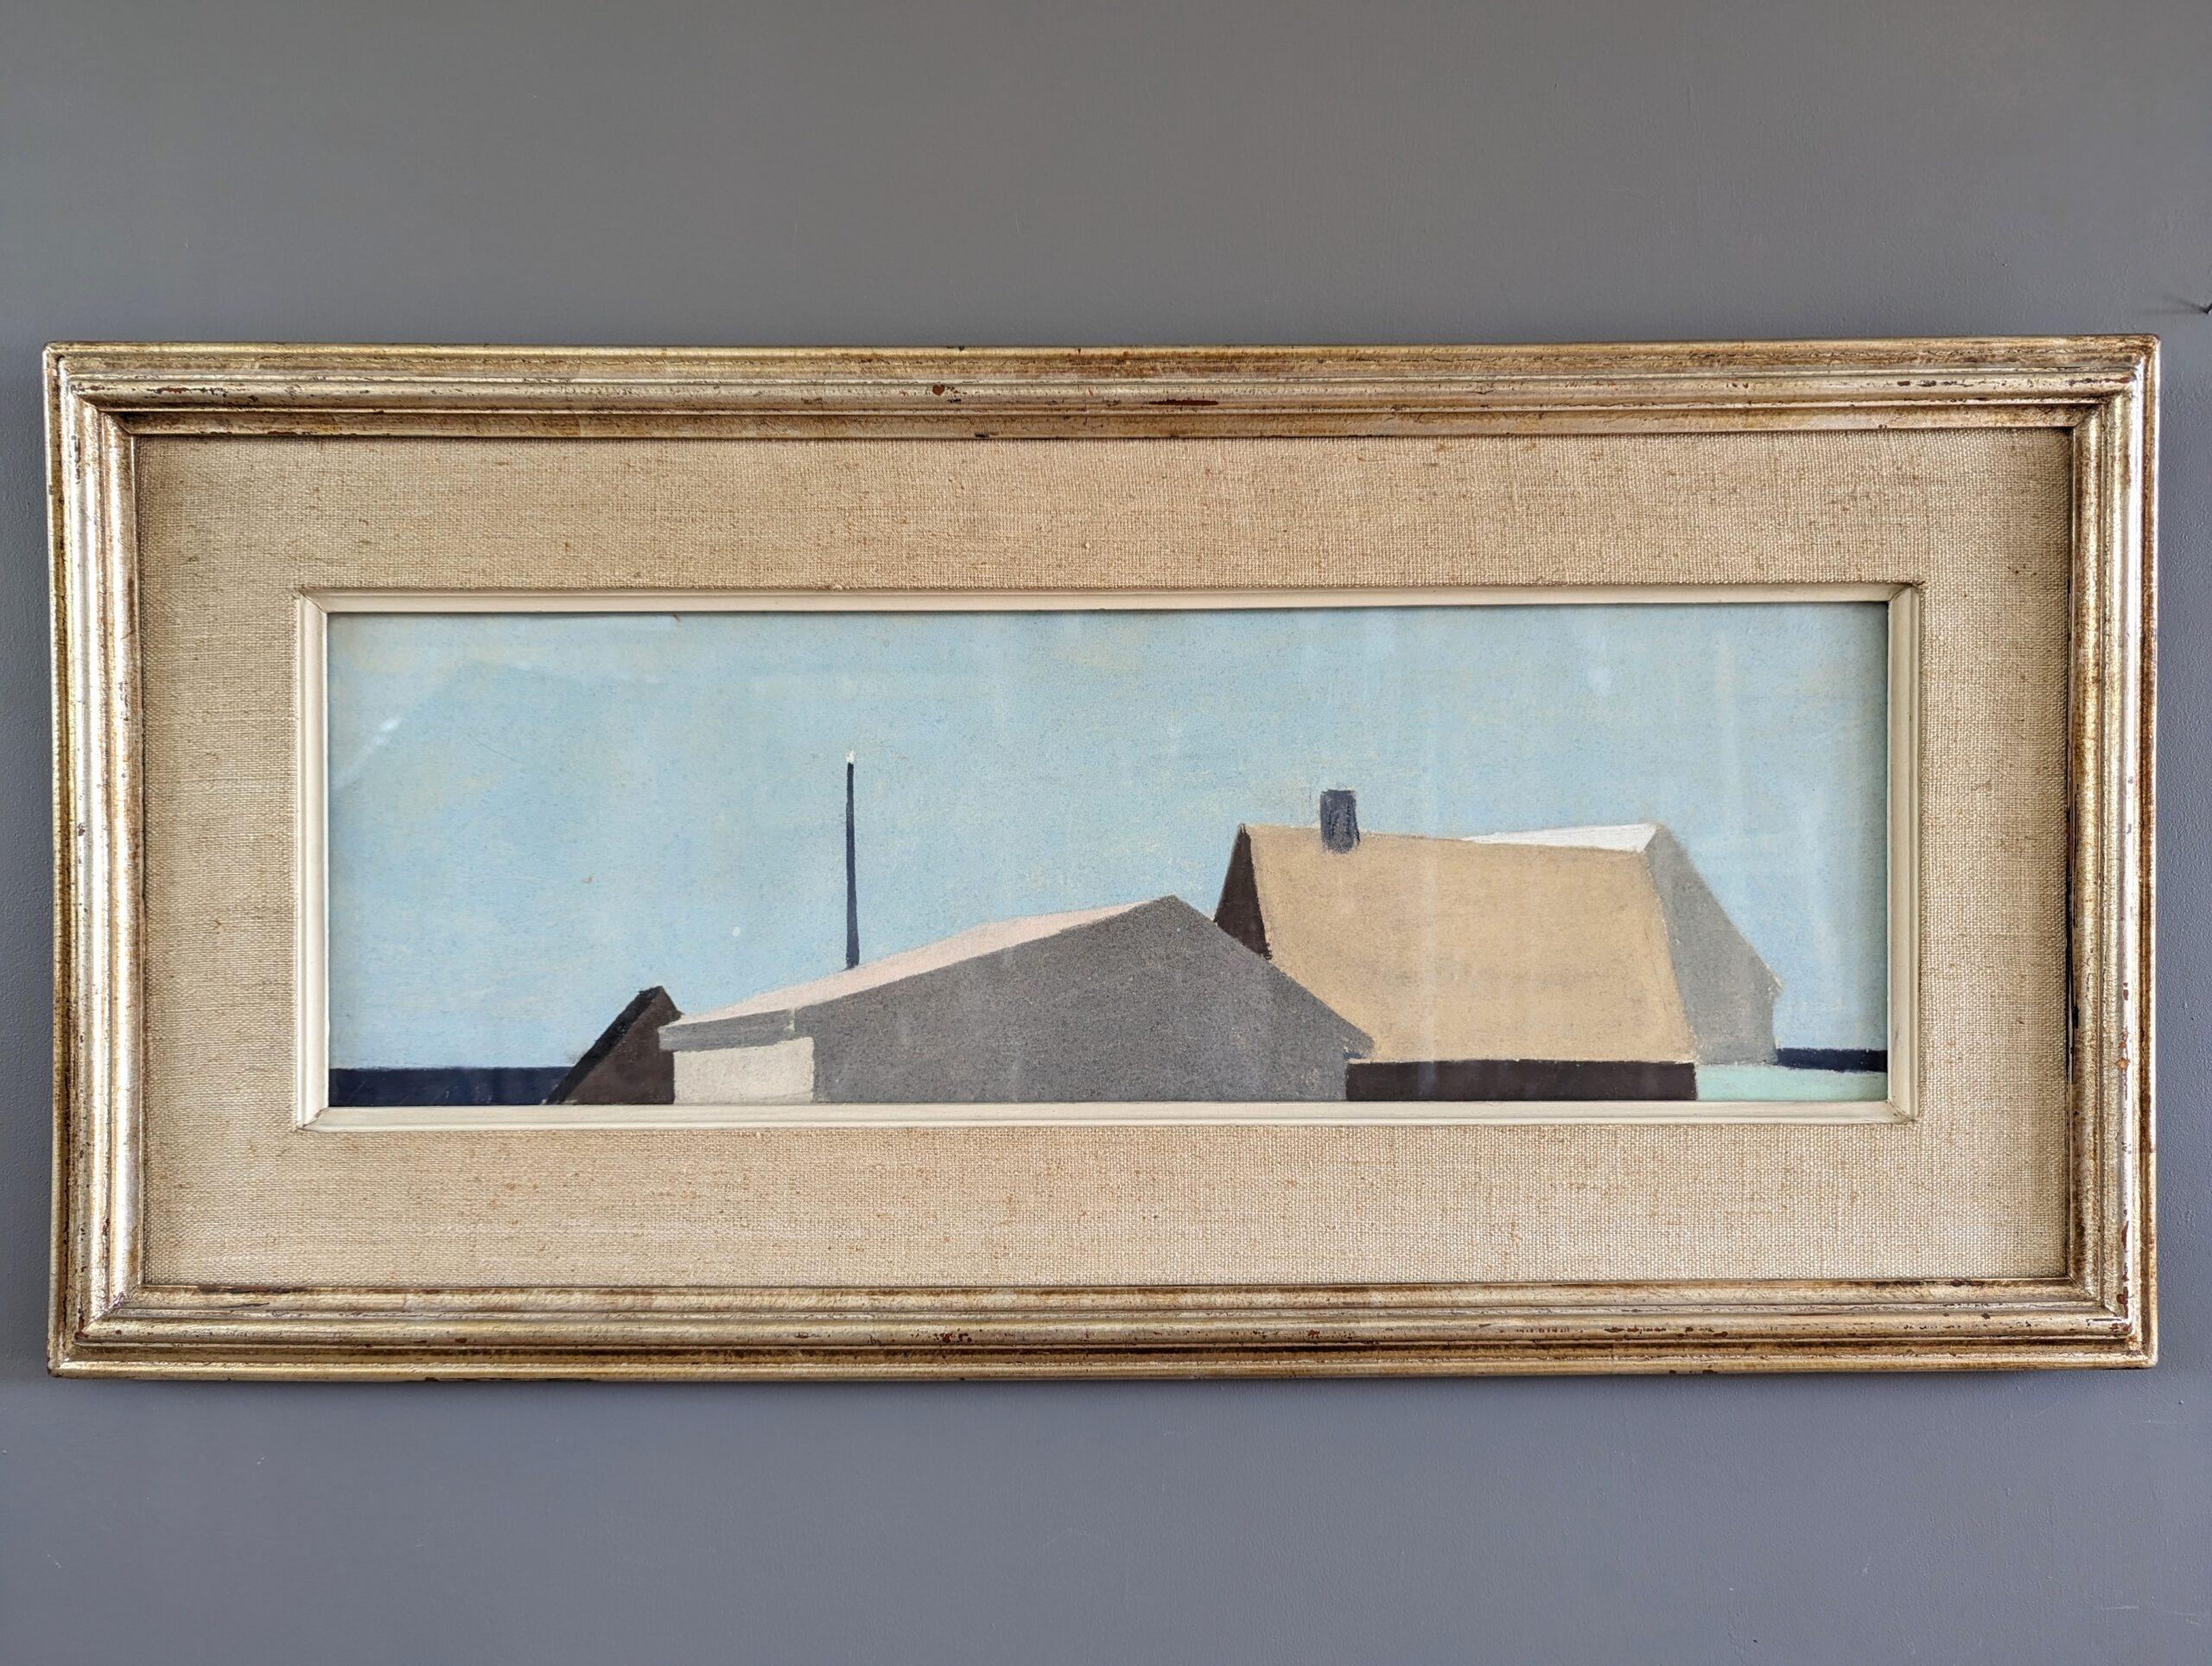 SKY BLUE
Size: 36 x 74 cm (including frame)
Pastel on Paper Laid onto Board

A mid-century modernist landscape composition, executed in pastel on paper and framed behind glass.

Seemingly simple yet very effective in its composition, the artist has